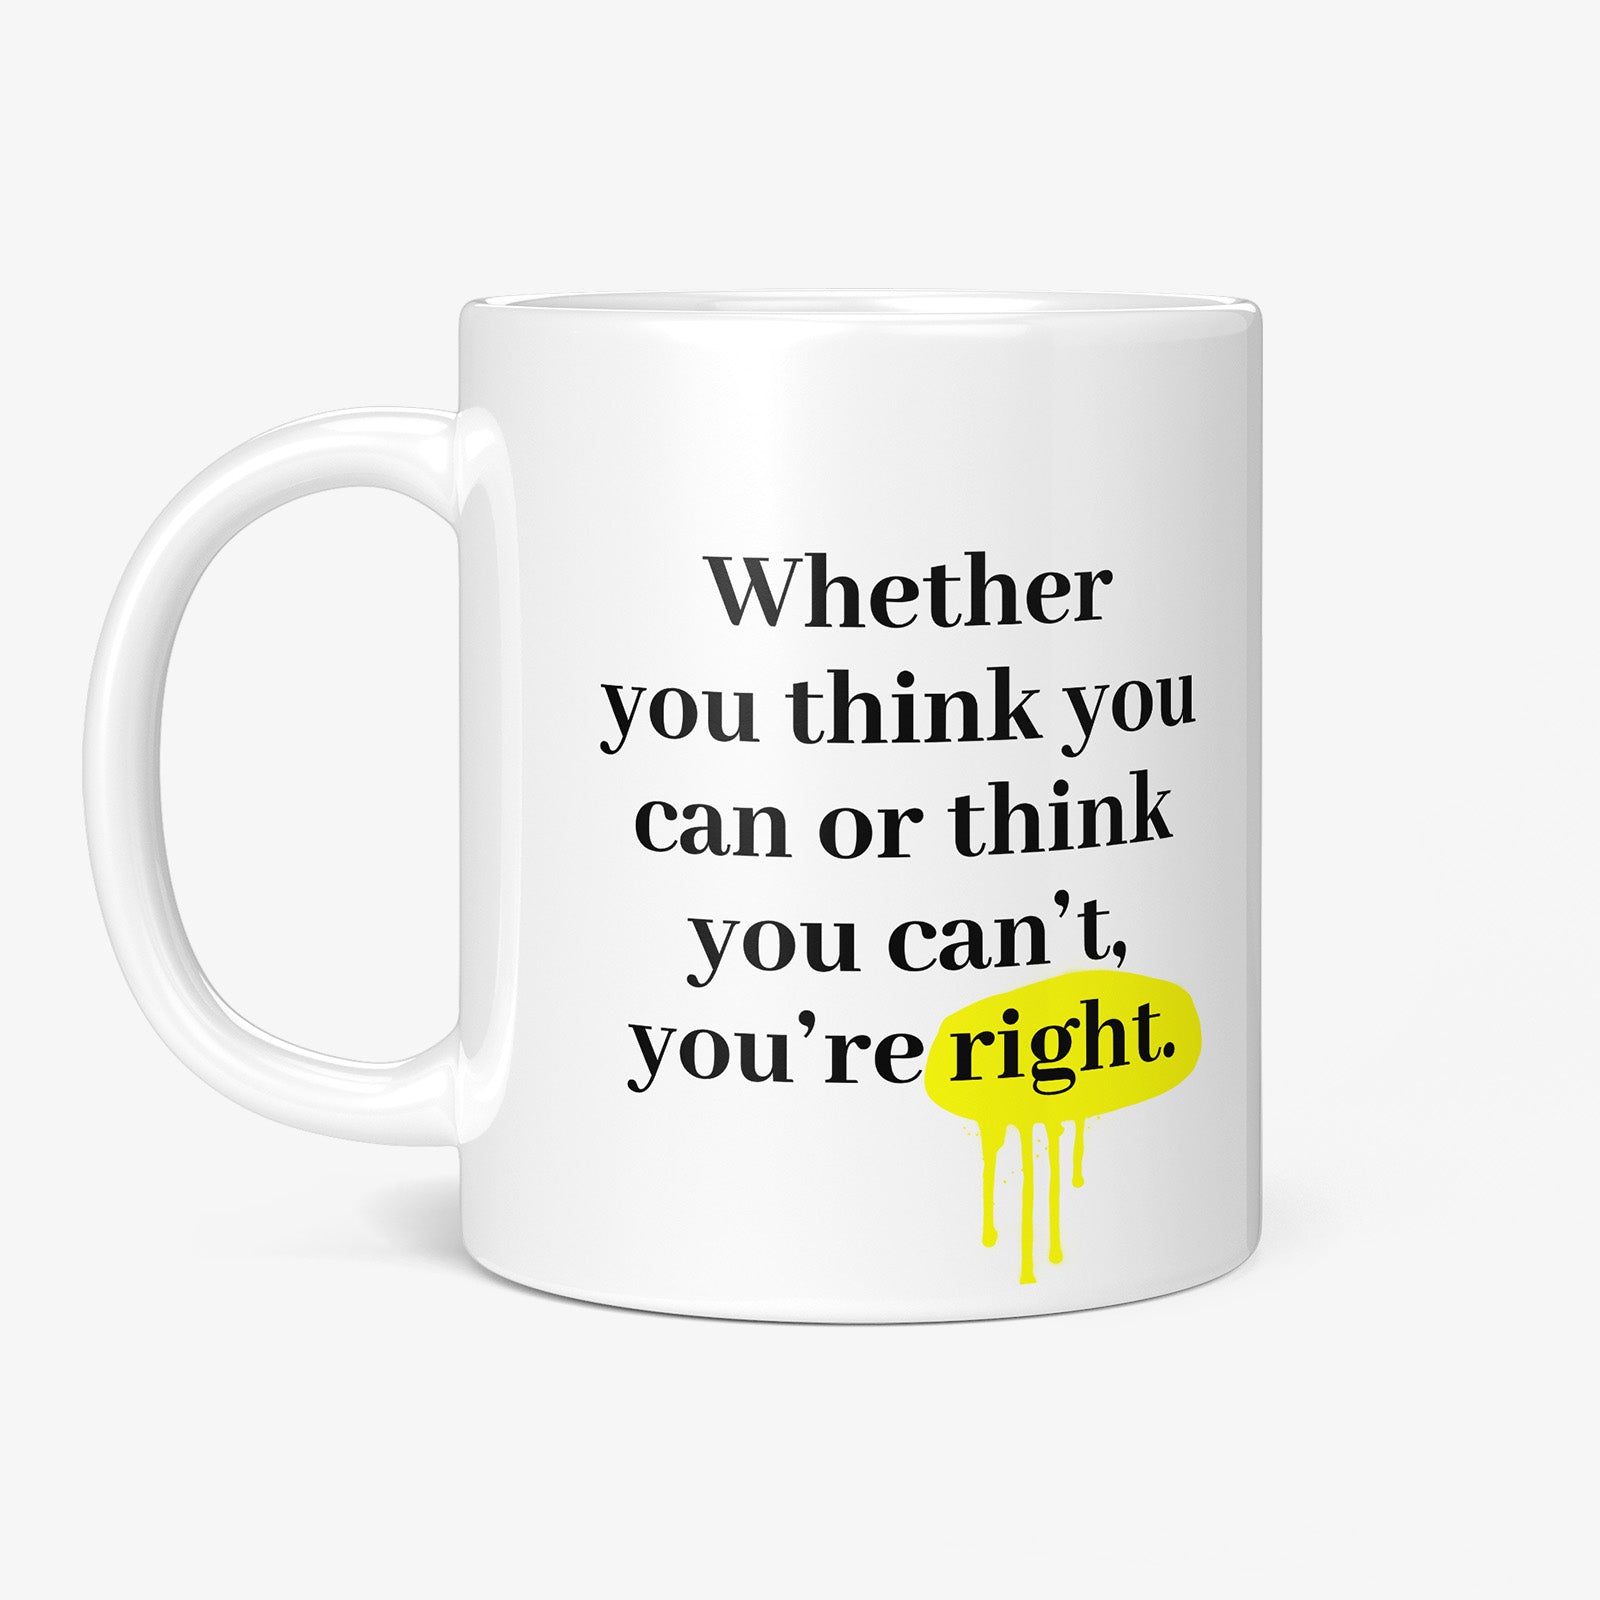 Be inspired by Henry Ford's famous quote, "Whether you think you can or think you can't, you're right" on this white and glossy 11oz coffee mug with the handle on the left.